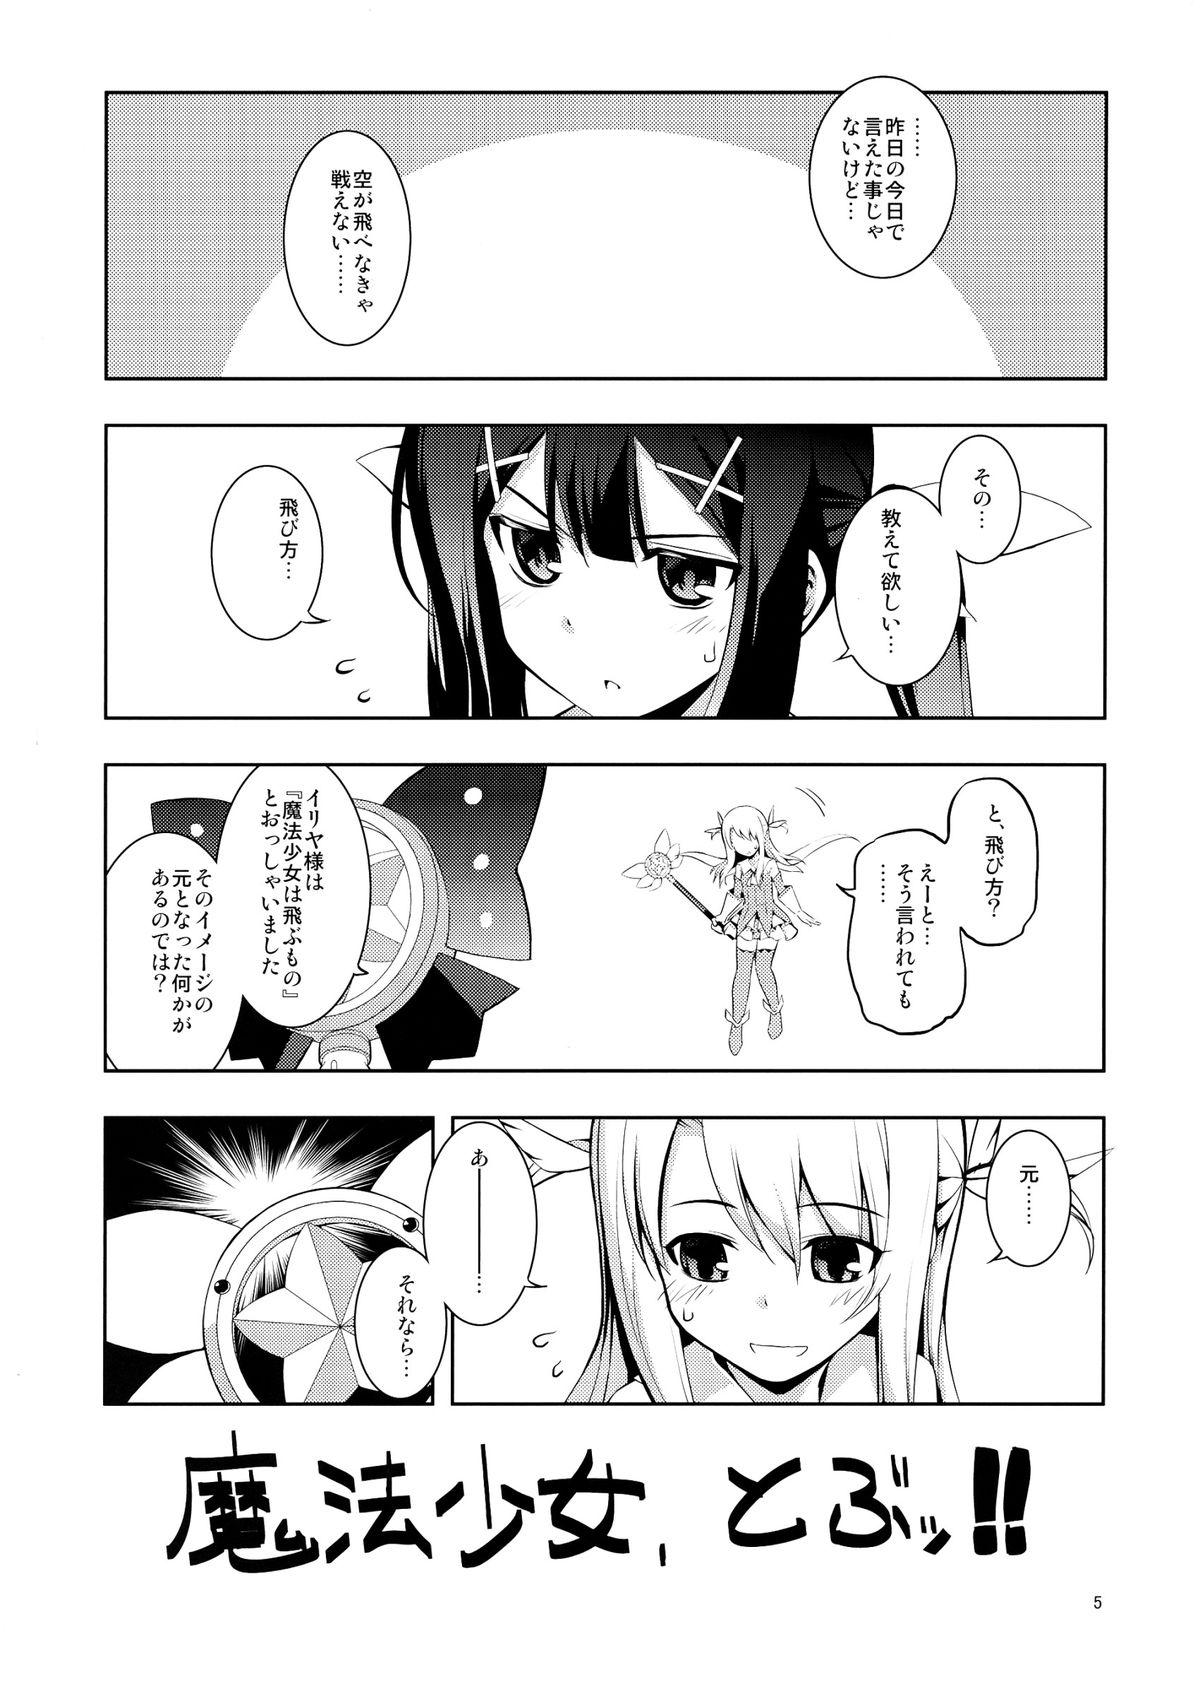 Stretching RE 18 - Fate kaleid liner prisma illya Pussylick - Page 5